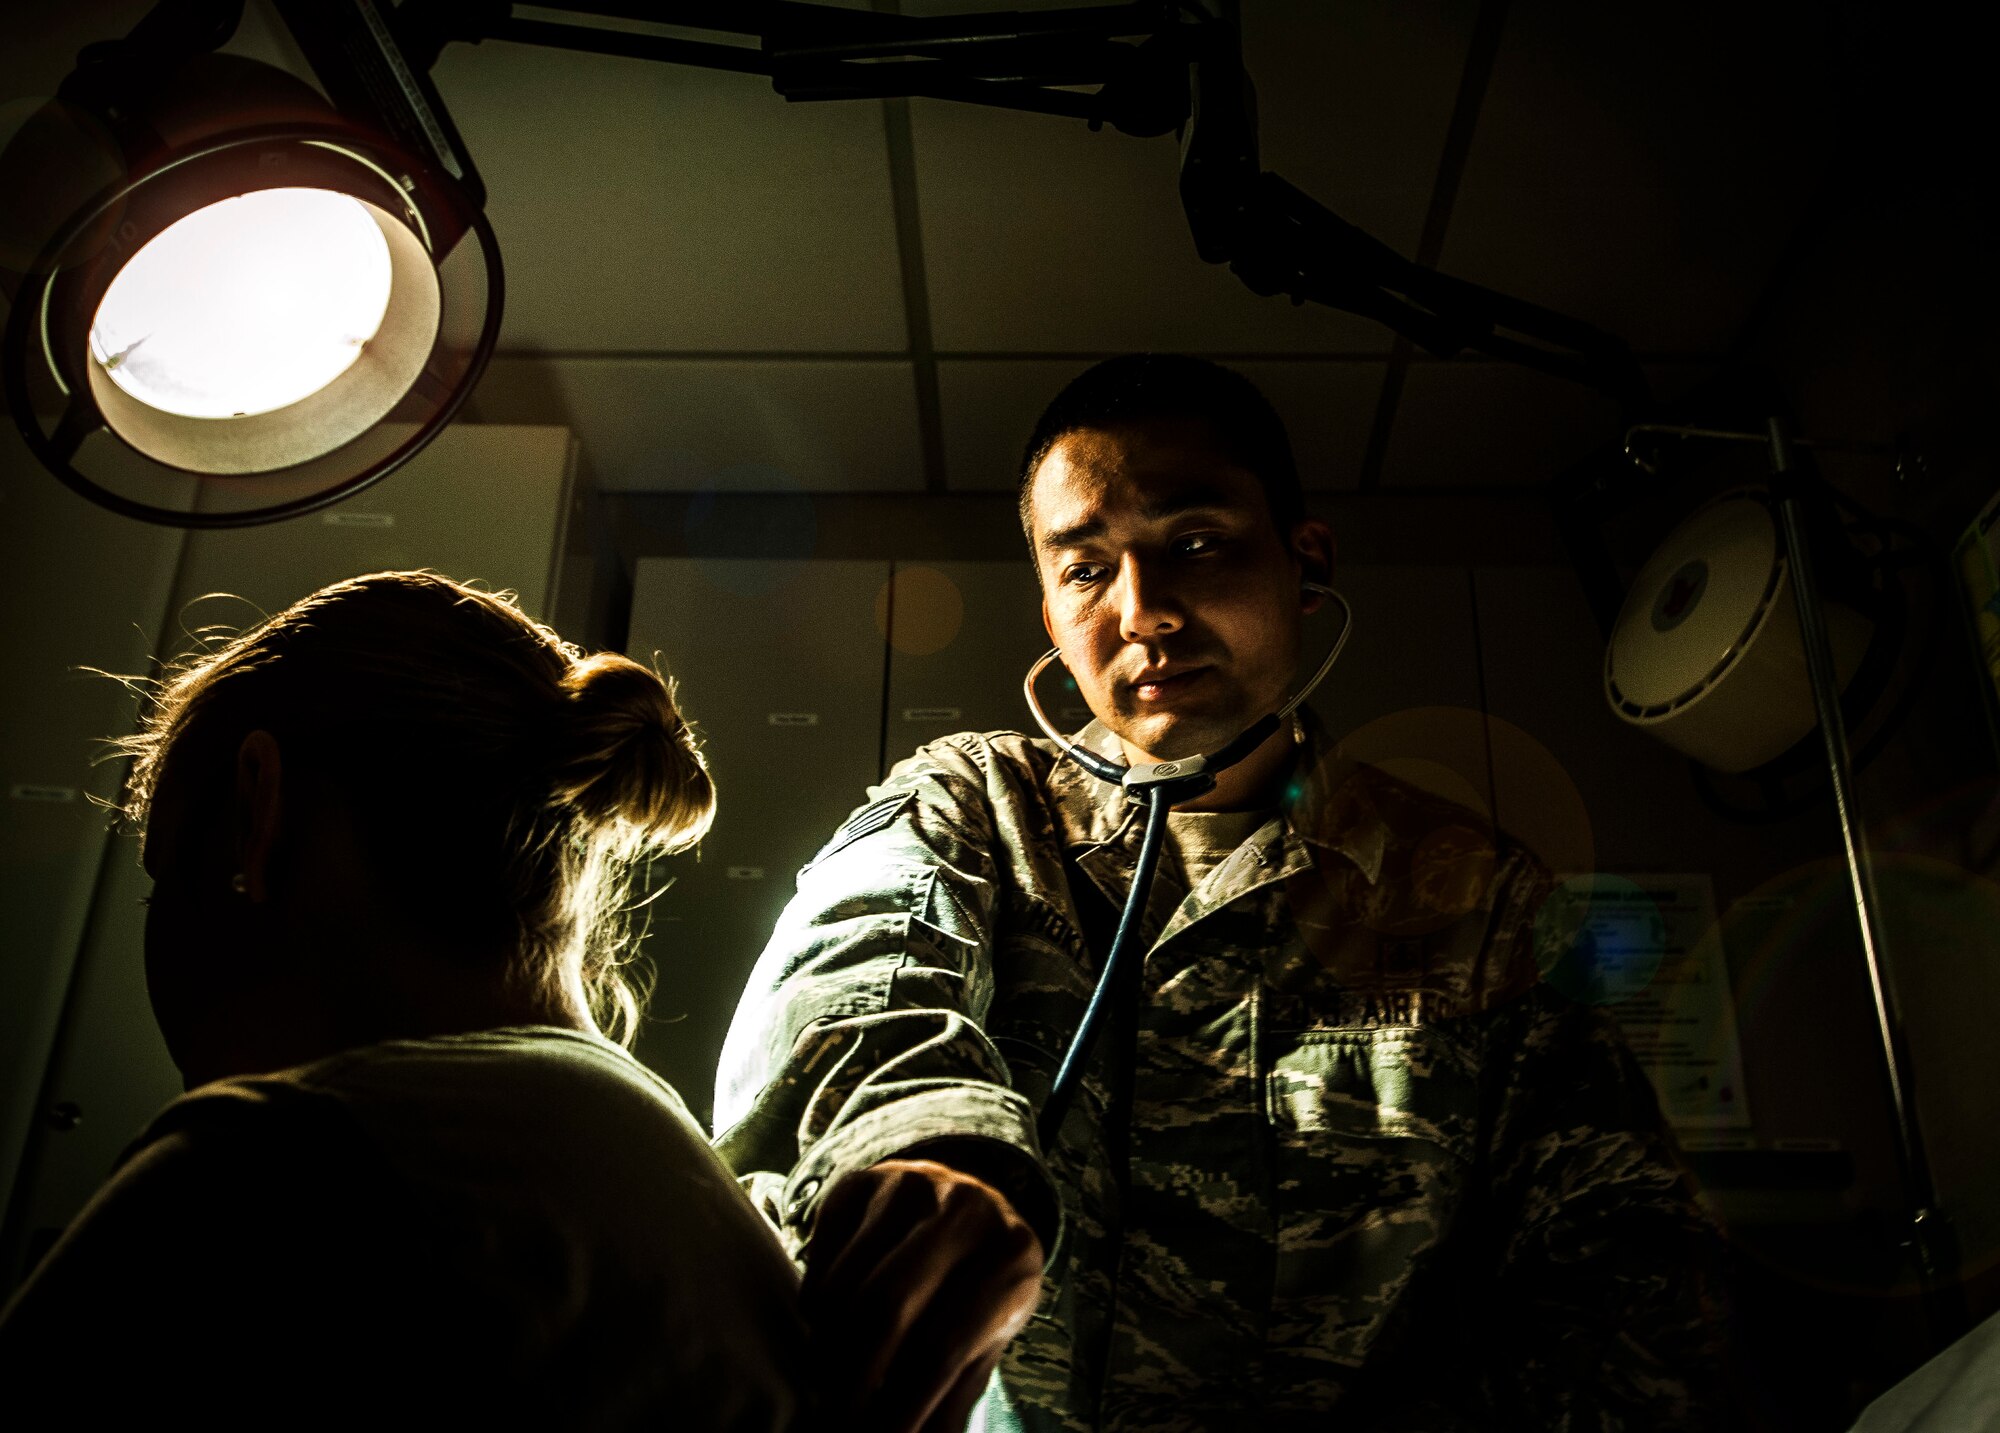 Staff Sgt. Darin Hoki, 628th Medical Group Independent Duty Medical Technician, demonstrates conducting a routine exam on an Airman at Joint Base Charleston – Air Base, Feb. 12, 2013. The IDMTs’ mission is to save lives while accomplishing various jobs. They provide and manage patient care while at home station. (U.S. Air Force photo / Airman 1st Class Tom Brading)